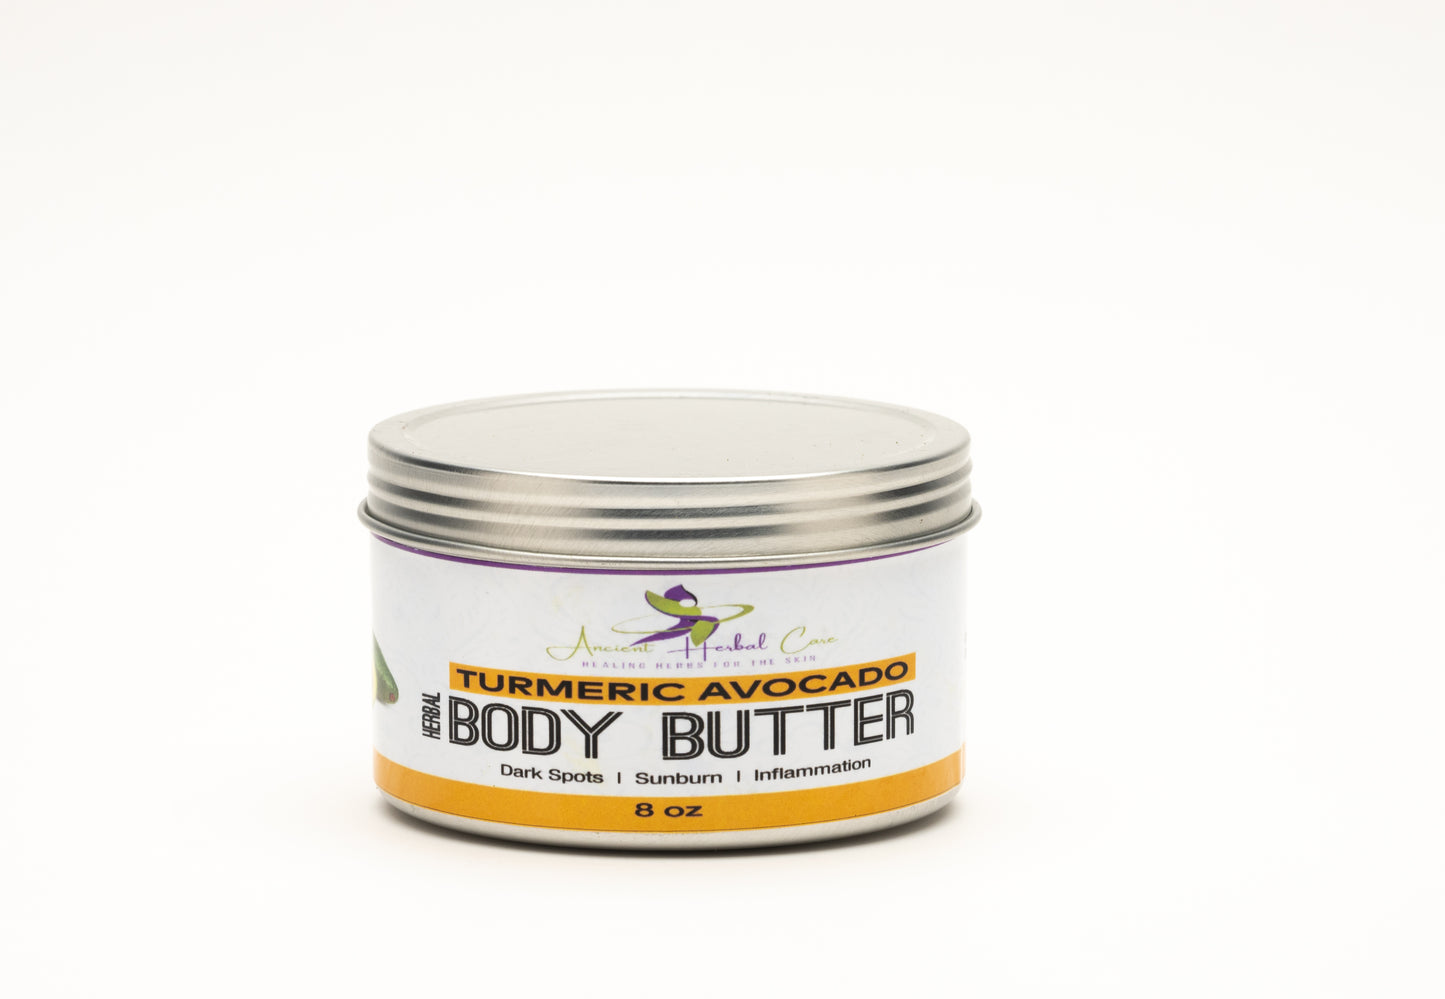 Turmeric Avocado Body Butter - Ancient Herbal Care